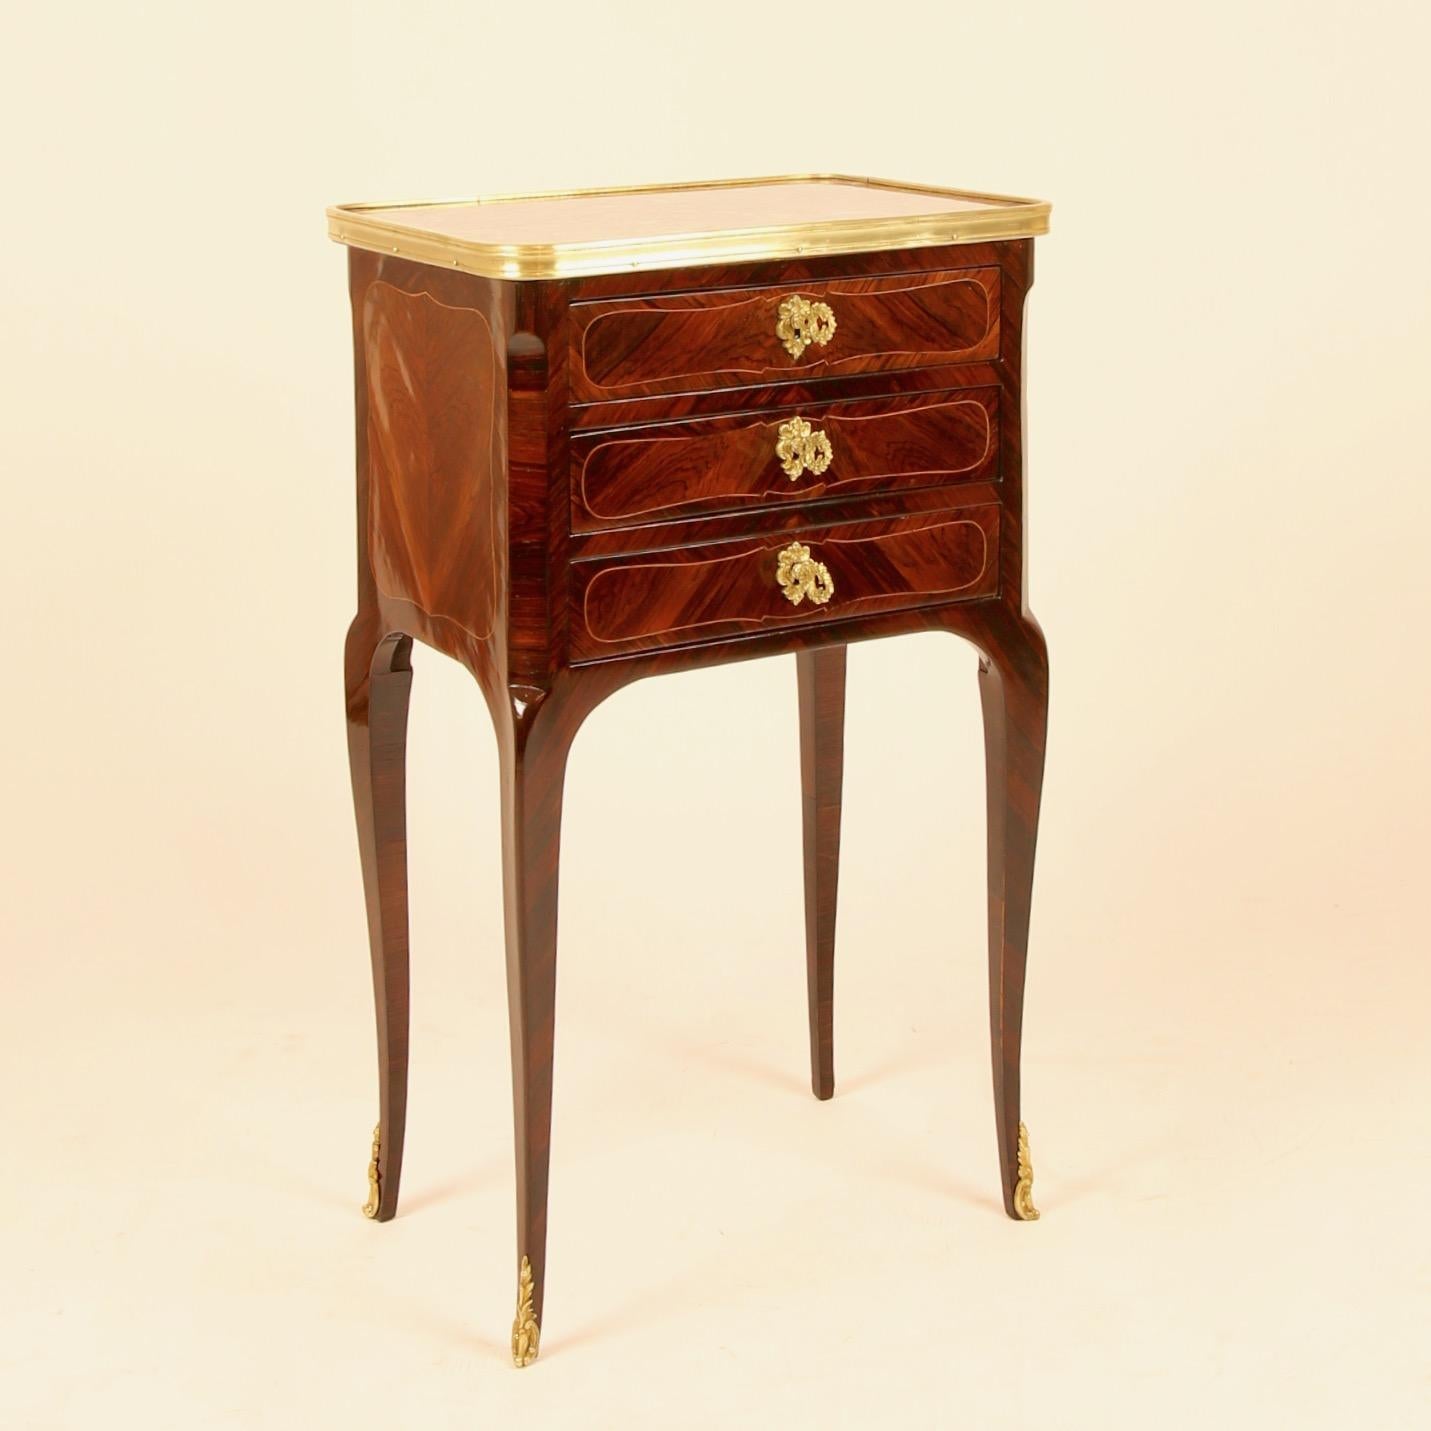 18th century Louis XV transition Marquetry marble-top side table or Écritoire

Small and elegant Louis XV transition period side table or so-called table écritoire standing on four slender cabriole legs. The straight rectangular body showing canted